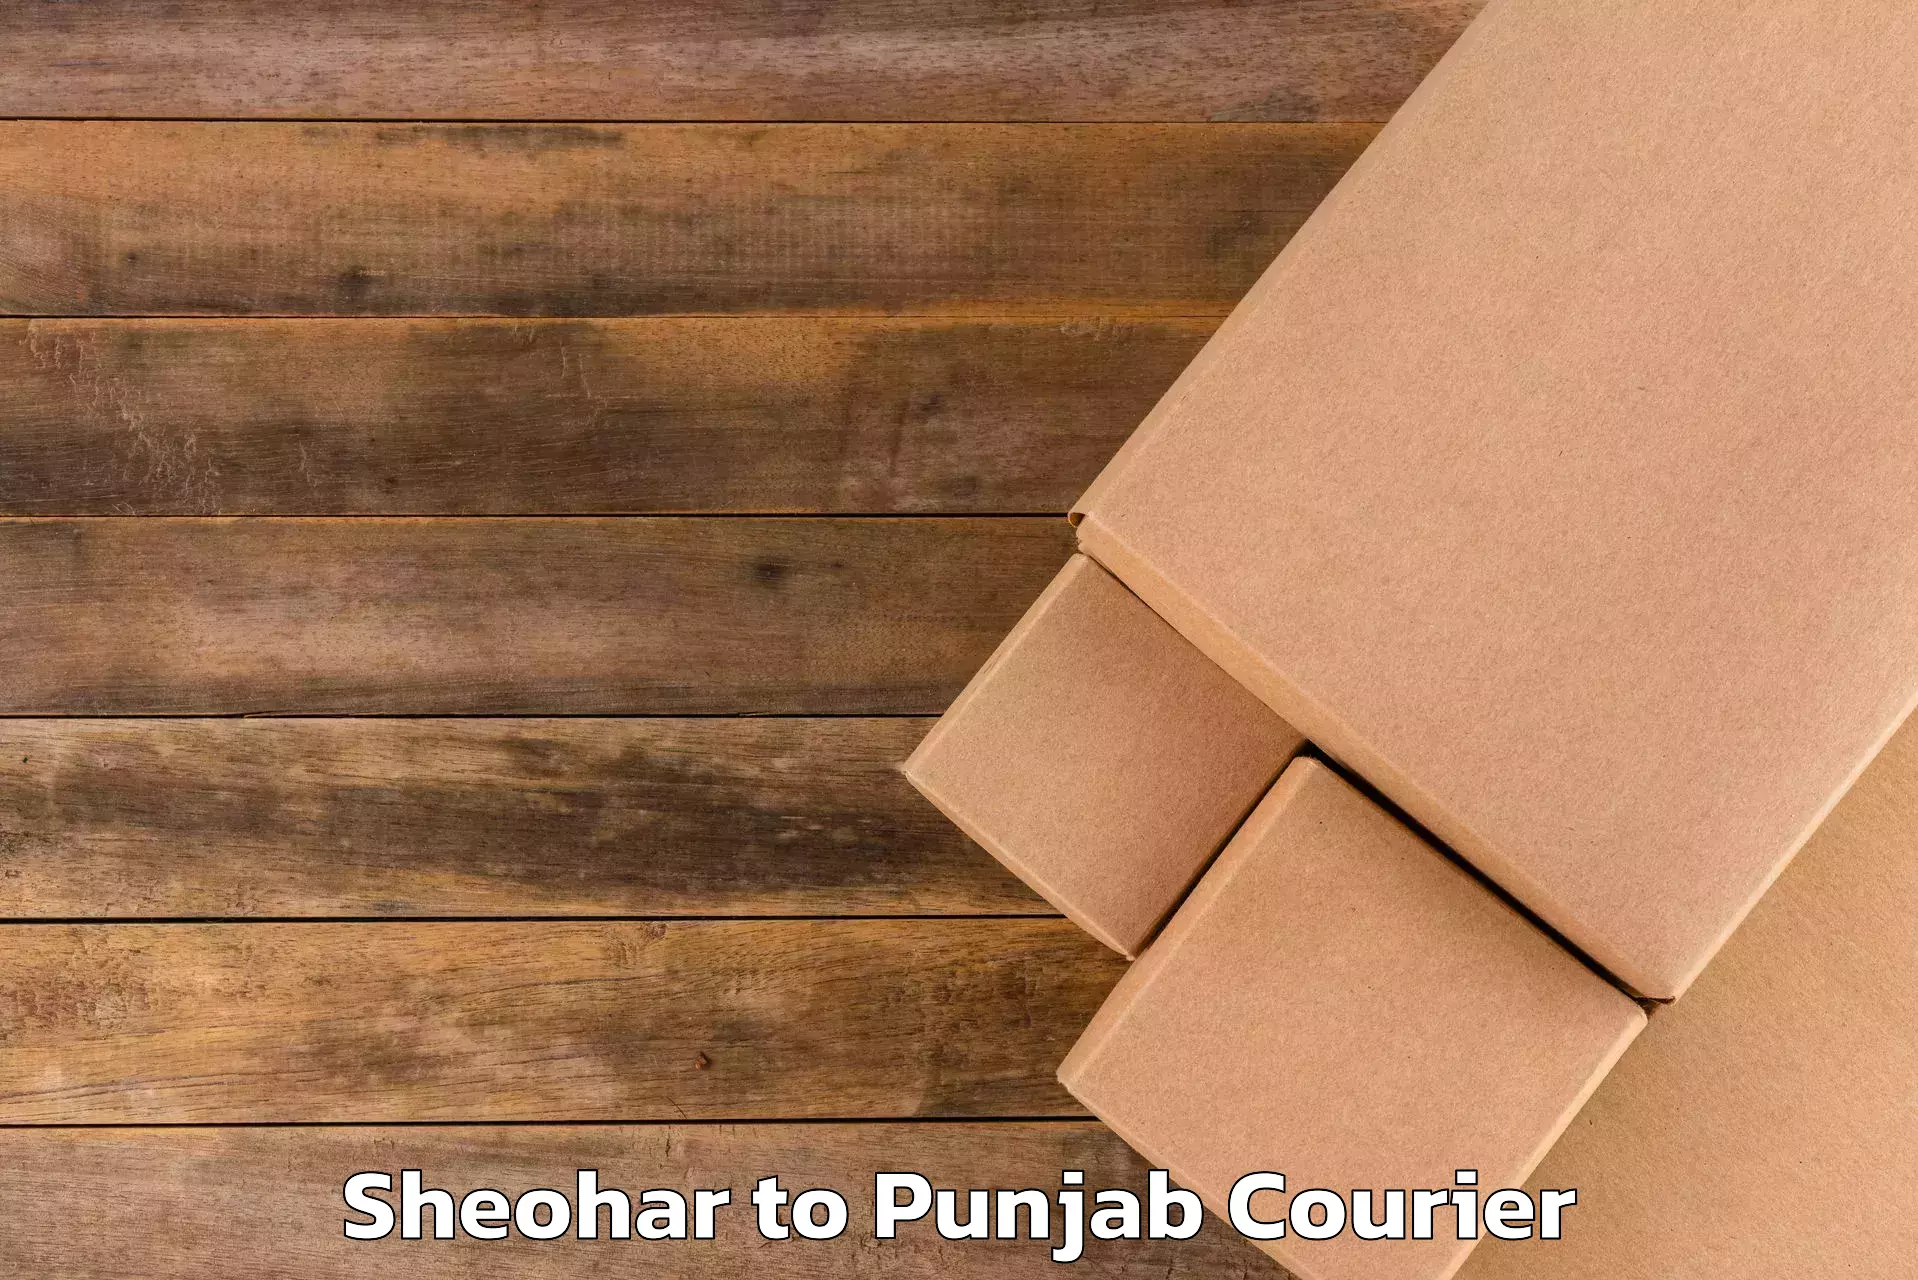 Instant baggage transport quote Sheohar to Amritsar